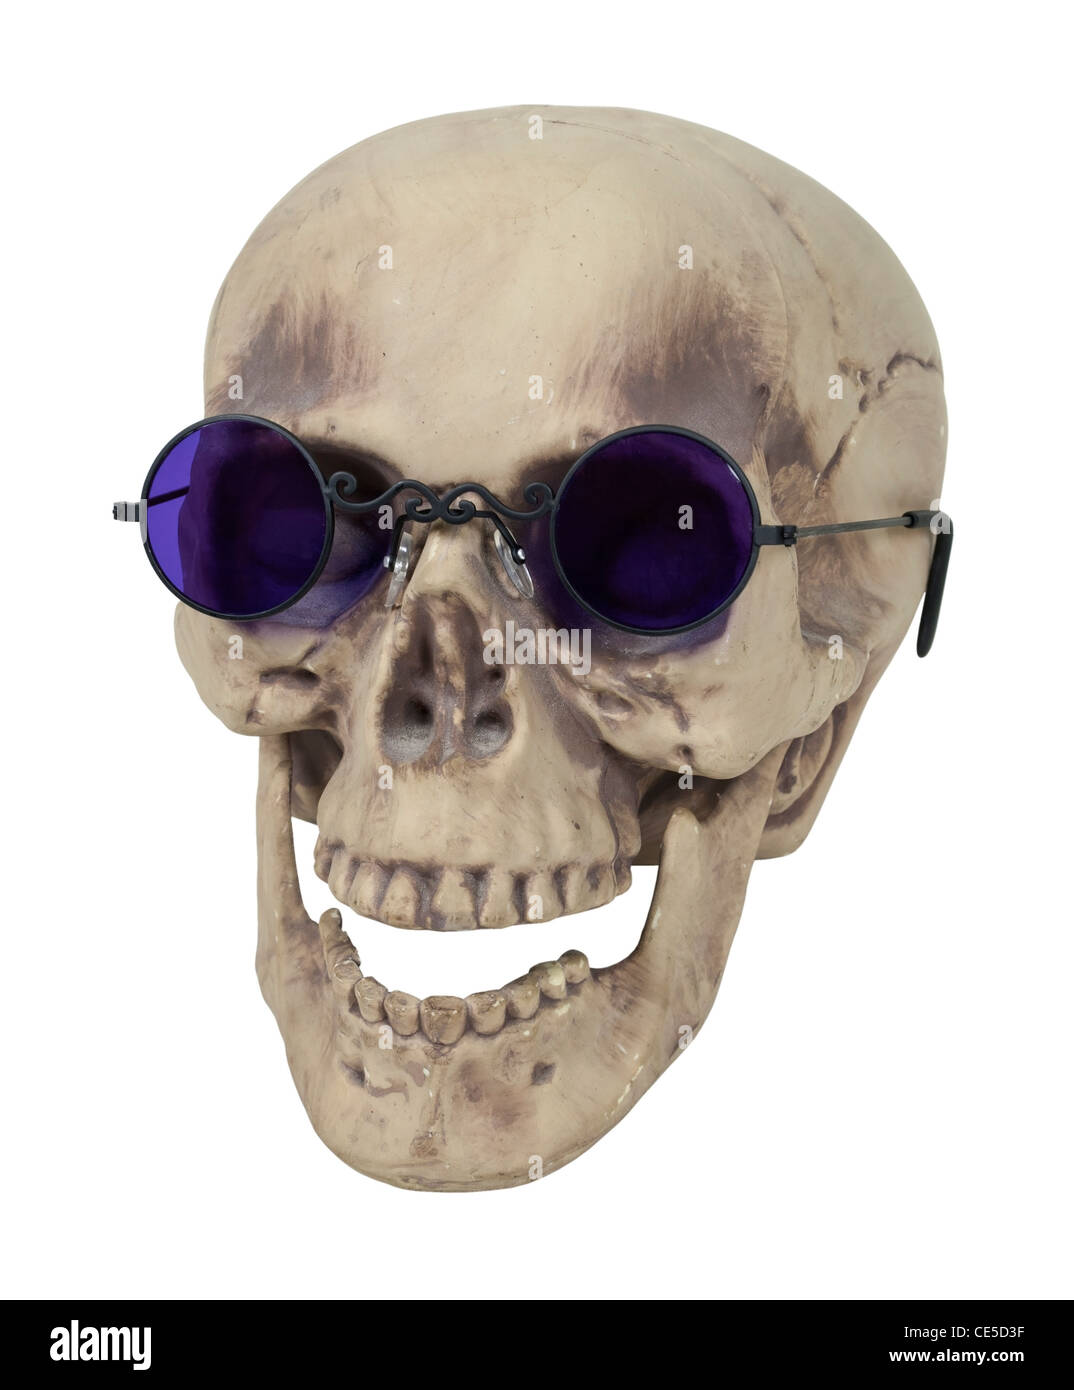 Skull with eye sockets and teeth wearing purple glasses - path included Stock Photo